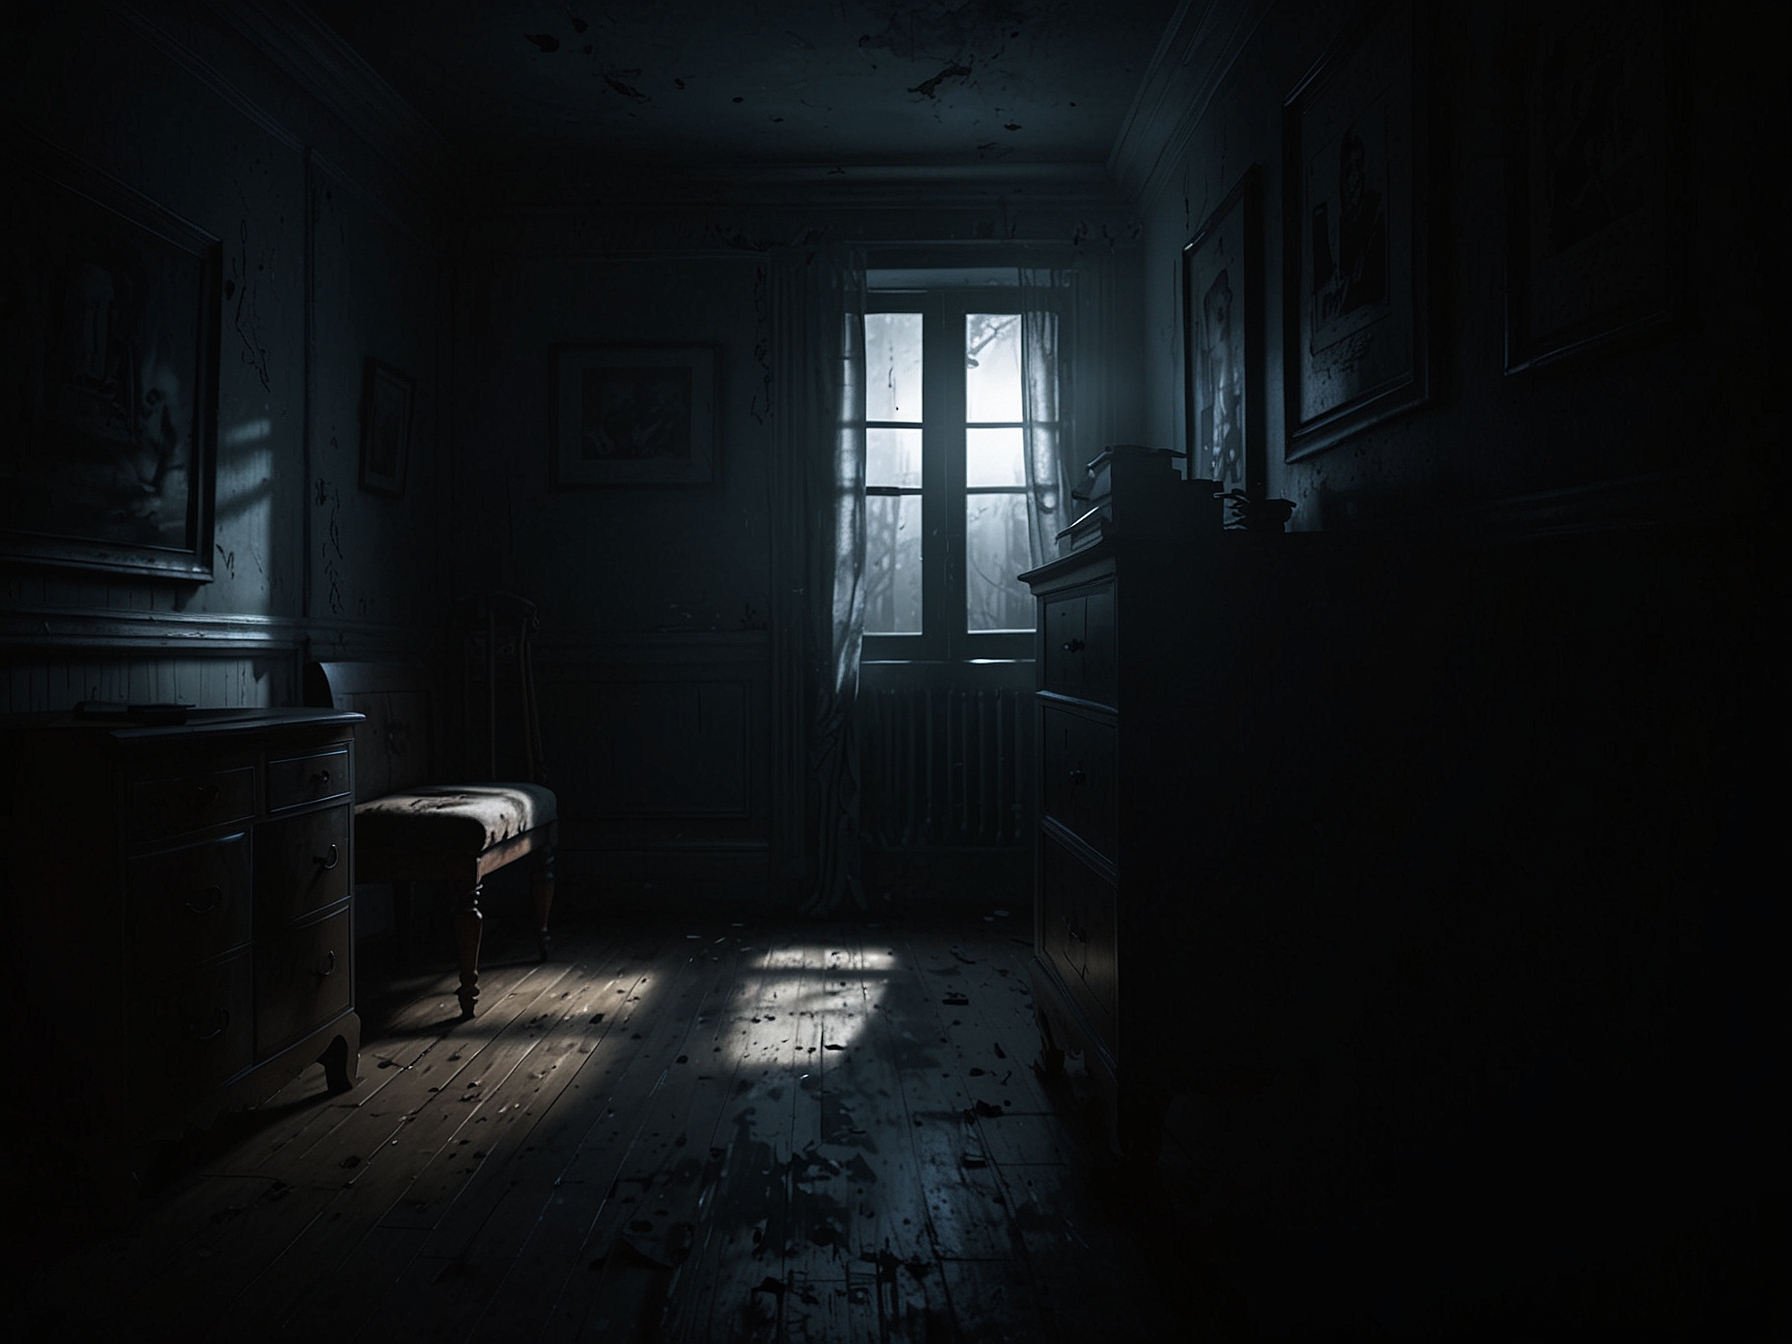 A screenshot showing a character hiding in a dimly lit room, with shadows and eerie lighting emphasizing the game's dark atmosphere and the threatening environment.